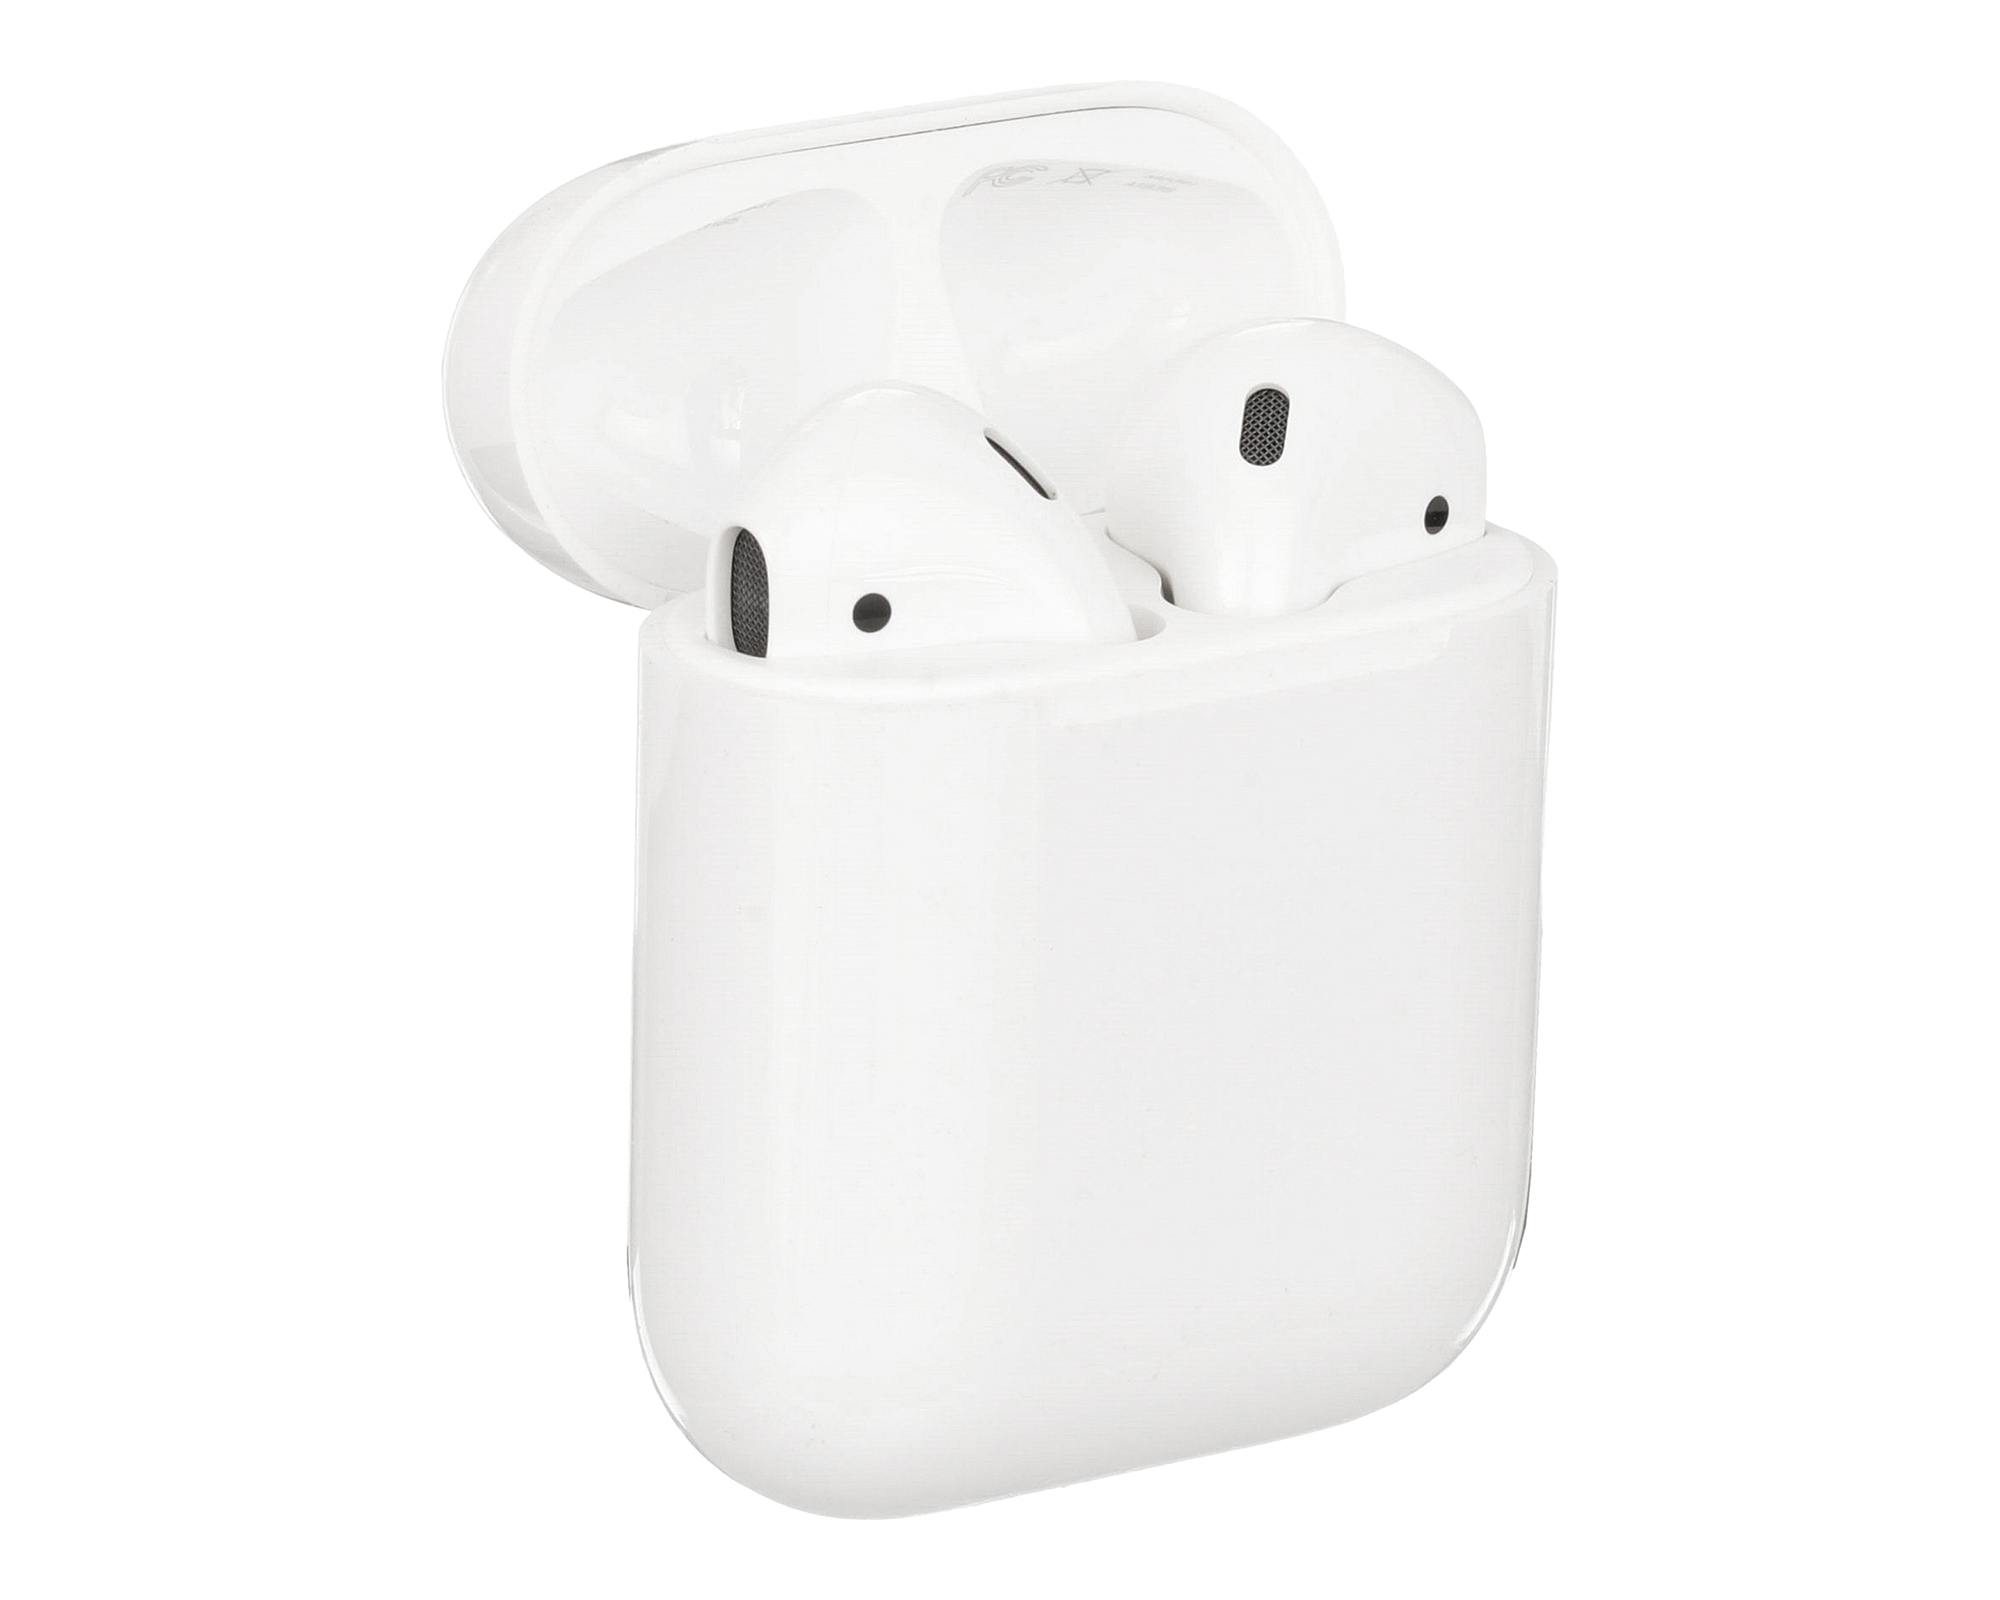 Used Apple AirPods Generation 2 with Wireless Charging Case MRXJ2AM/A (Used ) - image 3 of 8